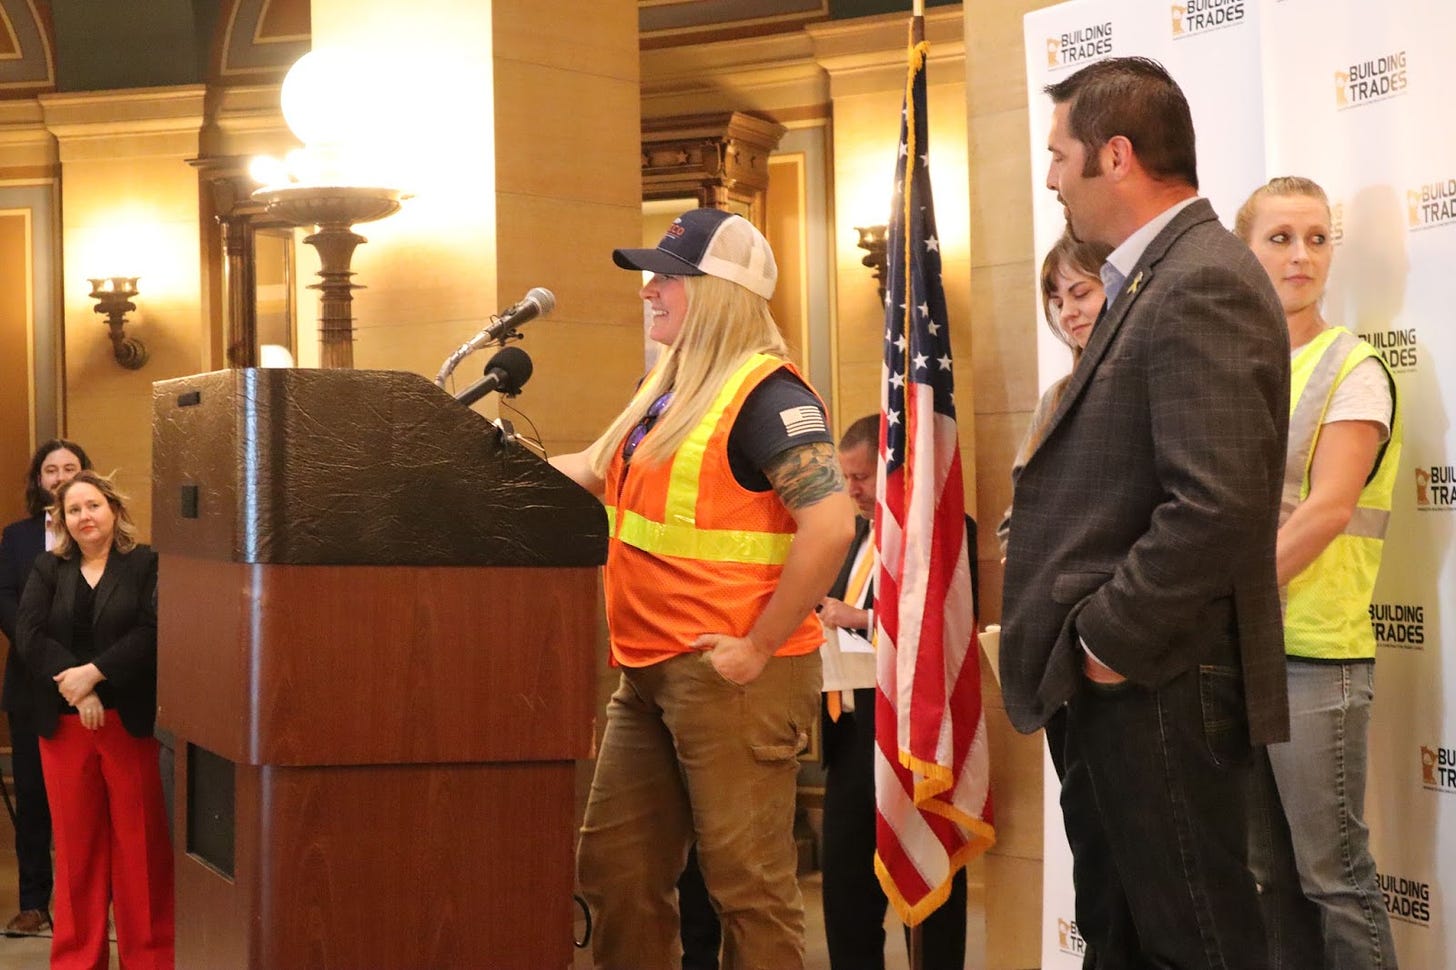 a blonde woman wearing a cap stands behind a podium wearing an orange construction vest, a man in a grey suit stands behind her